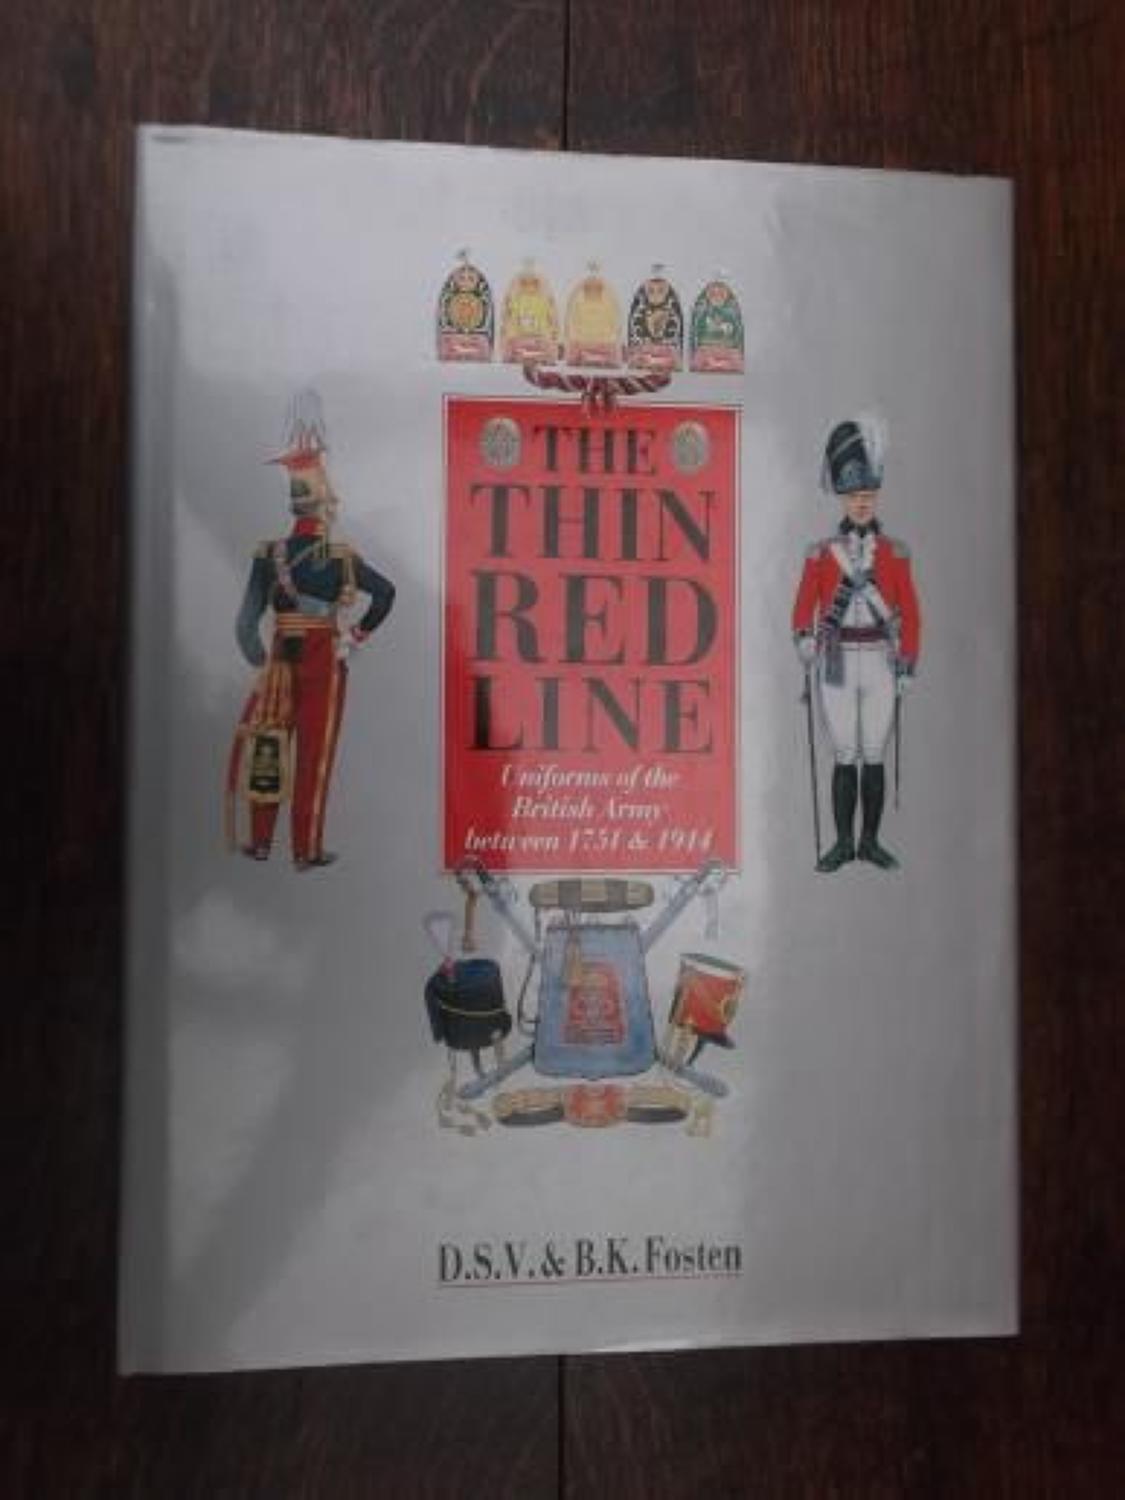 THE THIN RED LINE: UNIFORMS OF THE BRITISH ARMY 1751-1914